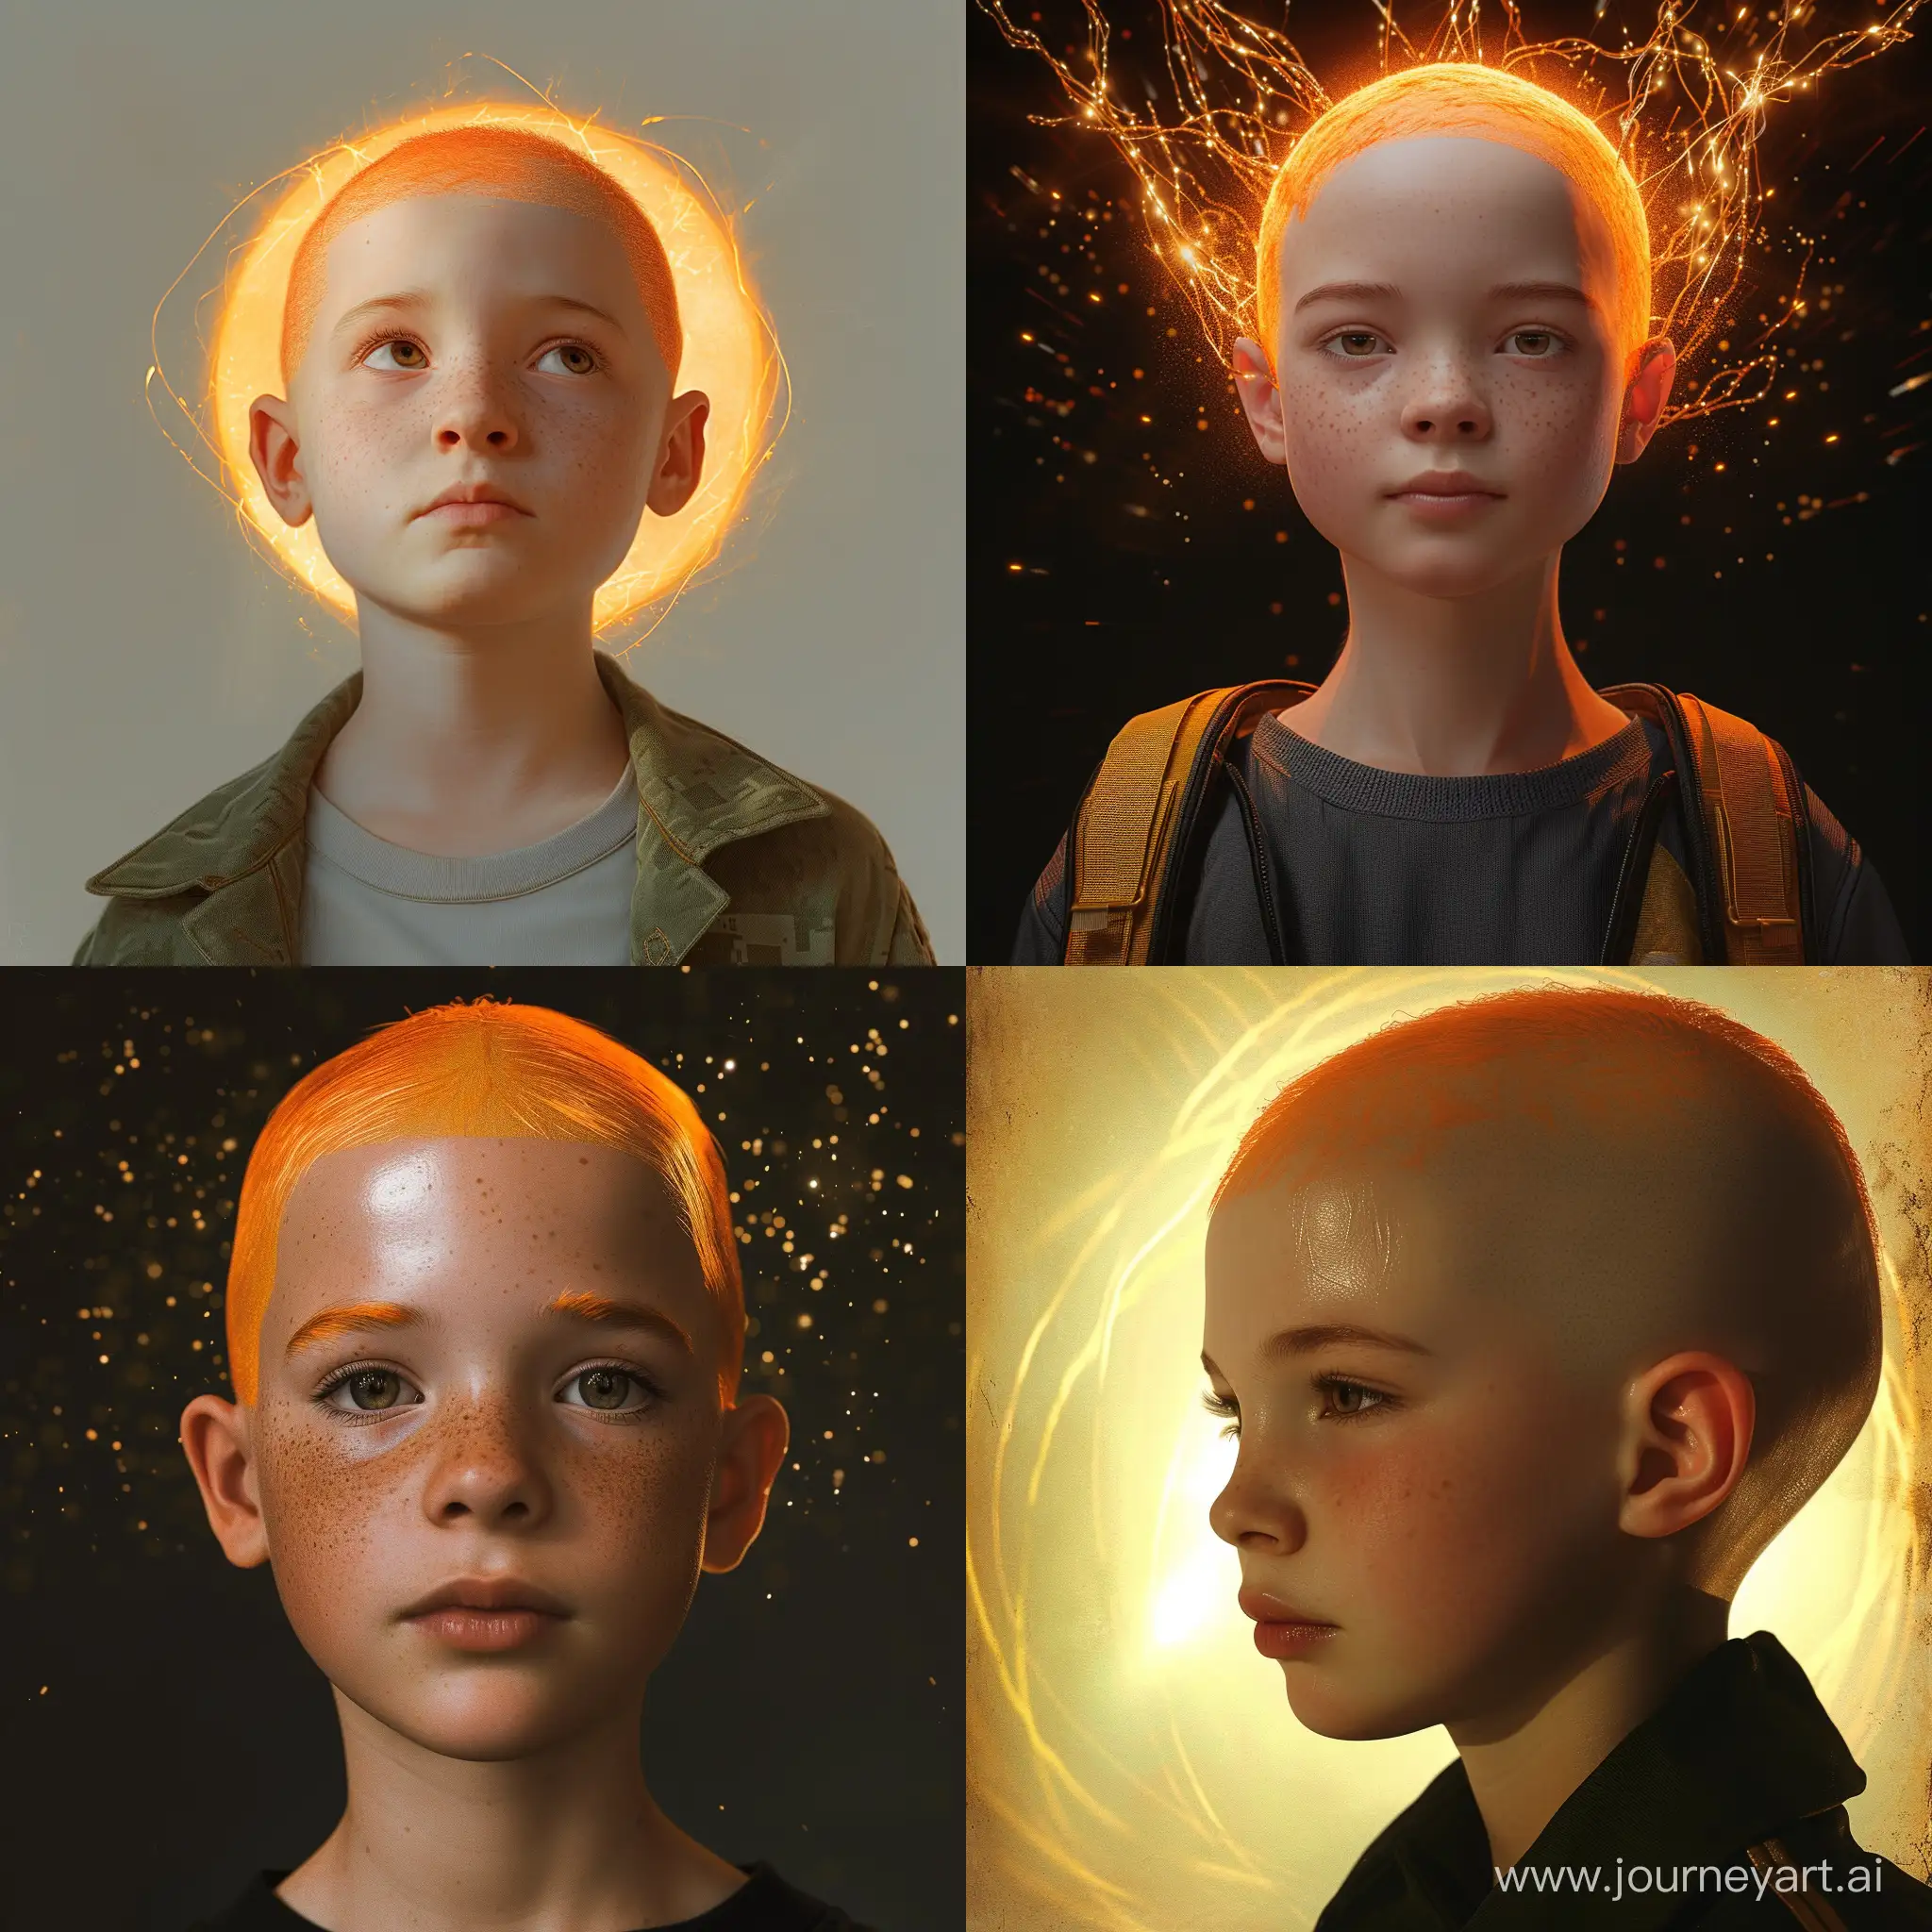 Create a lifelike depiction of a 12-year-old girl with freshly shaved orange hair, showcasing her bold decision to go bald for a military training. The image reflects her resilience and commitment, with a focus on her facial expressions and the empowering aura surrounding her.